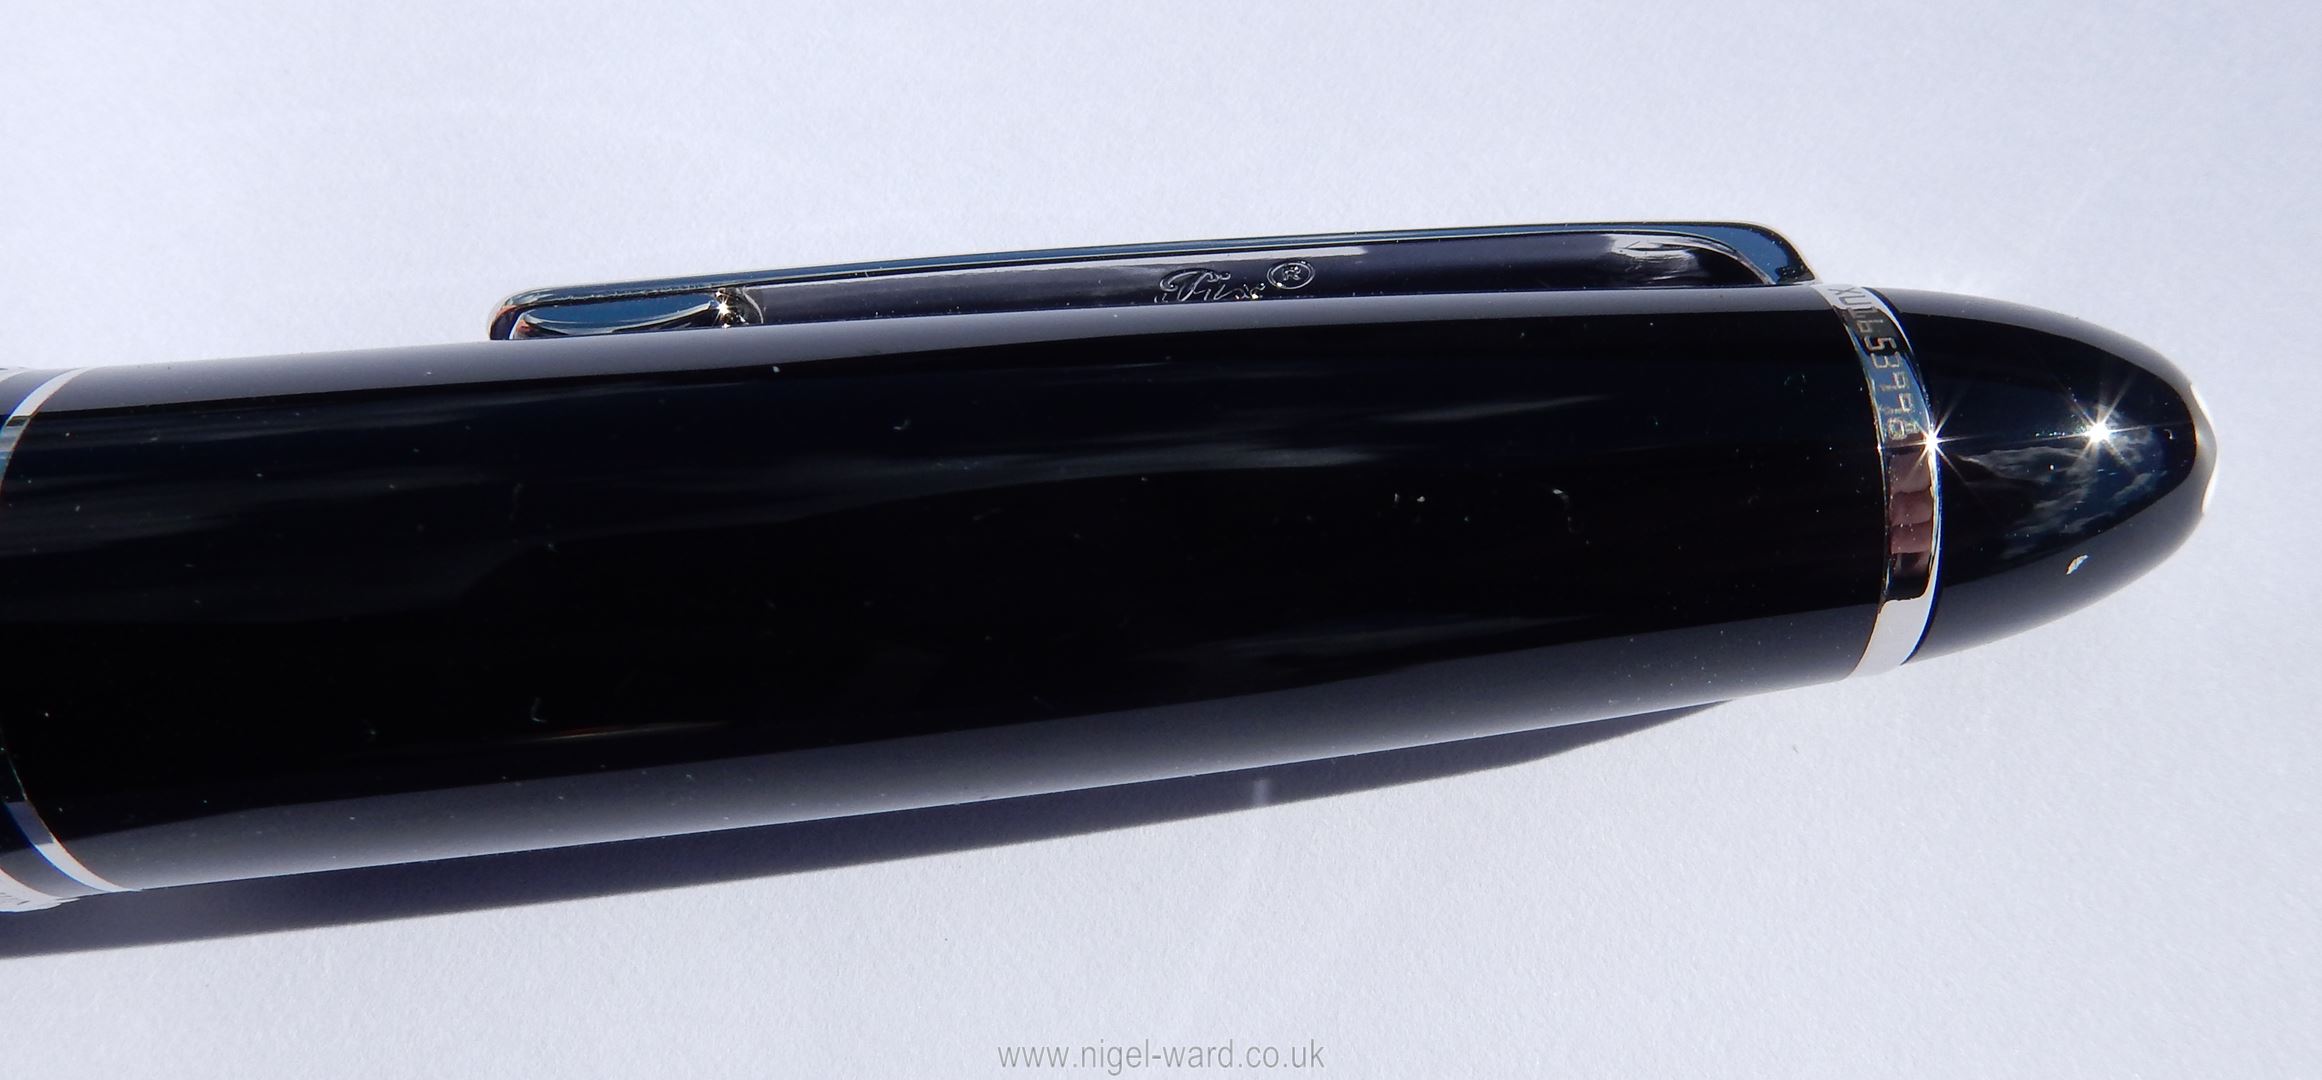 A Montblanc Meisterstuck Pix Classique Platinum-Coated Ballpoint Pen, initialled "JH" to the clip, - Image 6 of 8